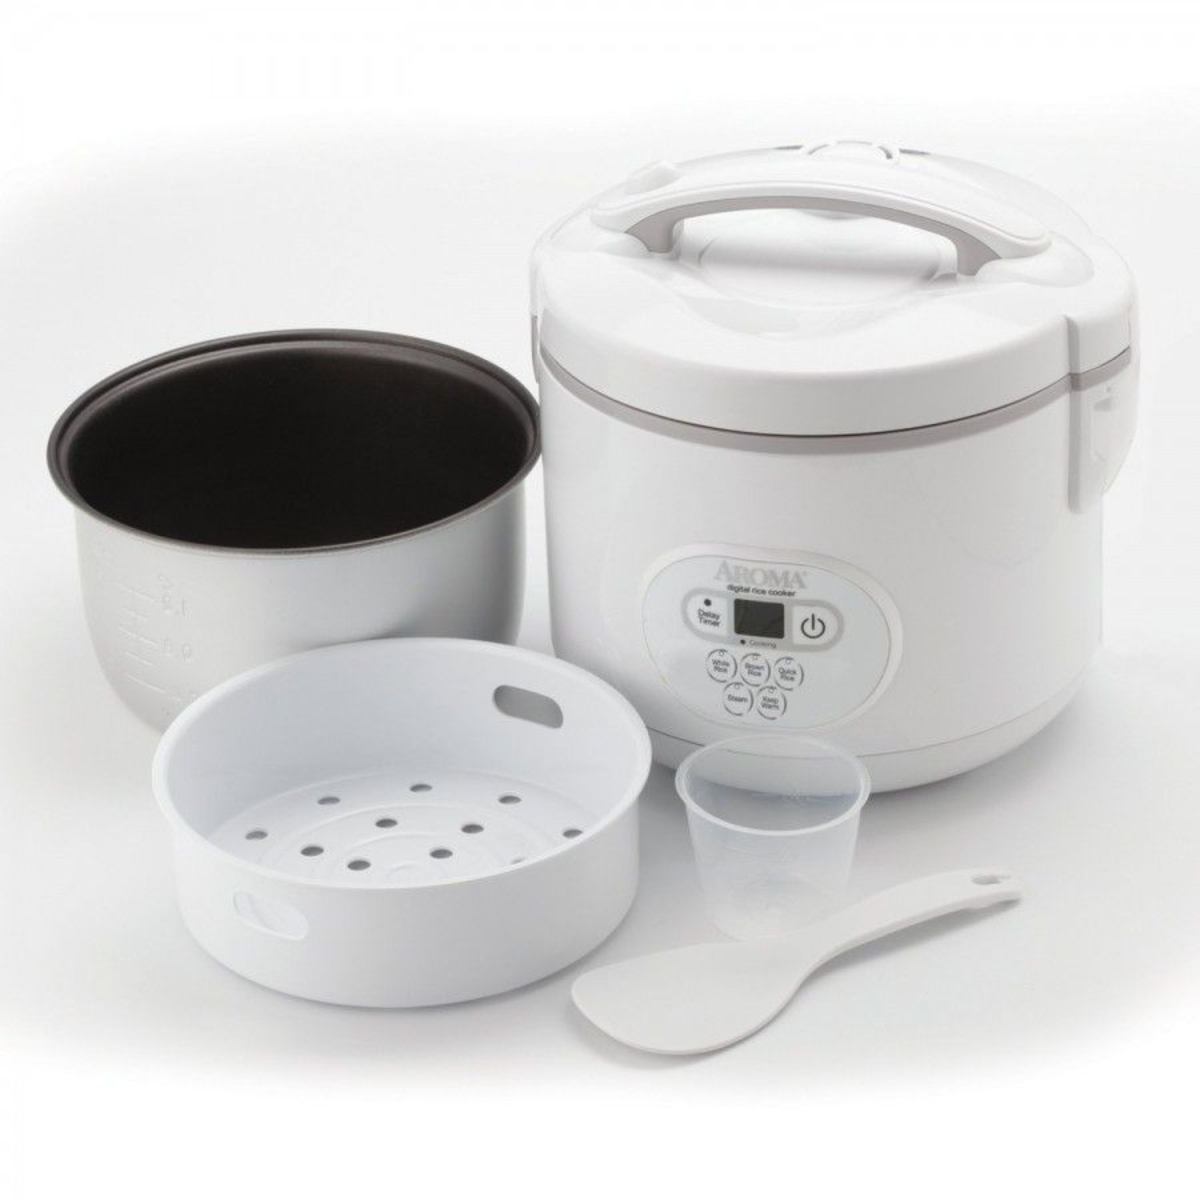 12 Amazing Aroma Rice Cooker Replacement Parts For 2023